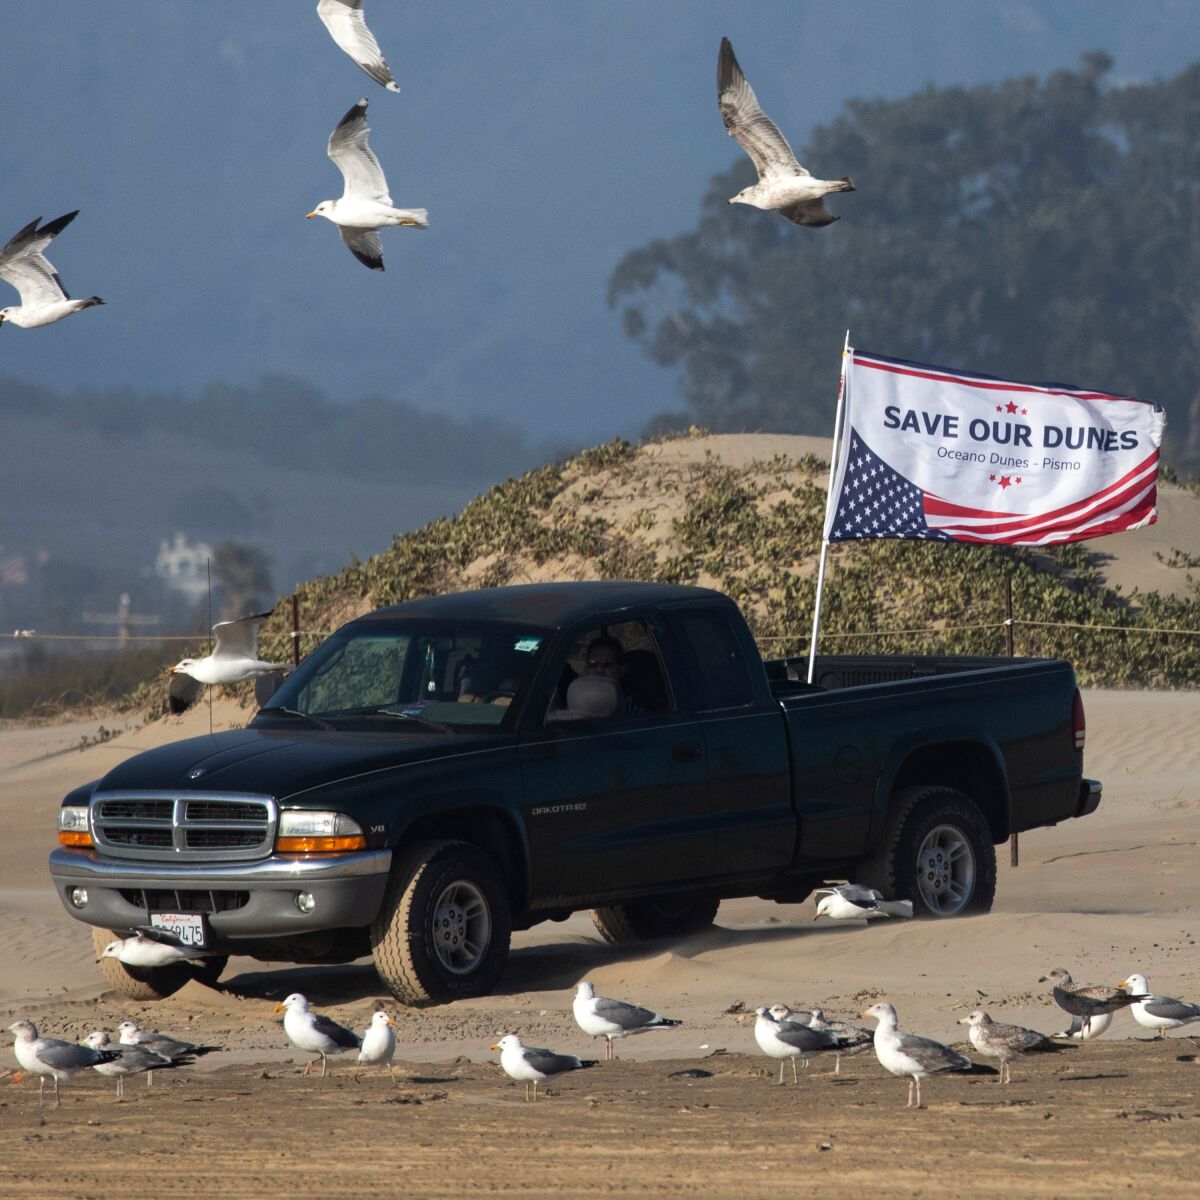 A pickup truck flies a banner saying "Save our dunes"